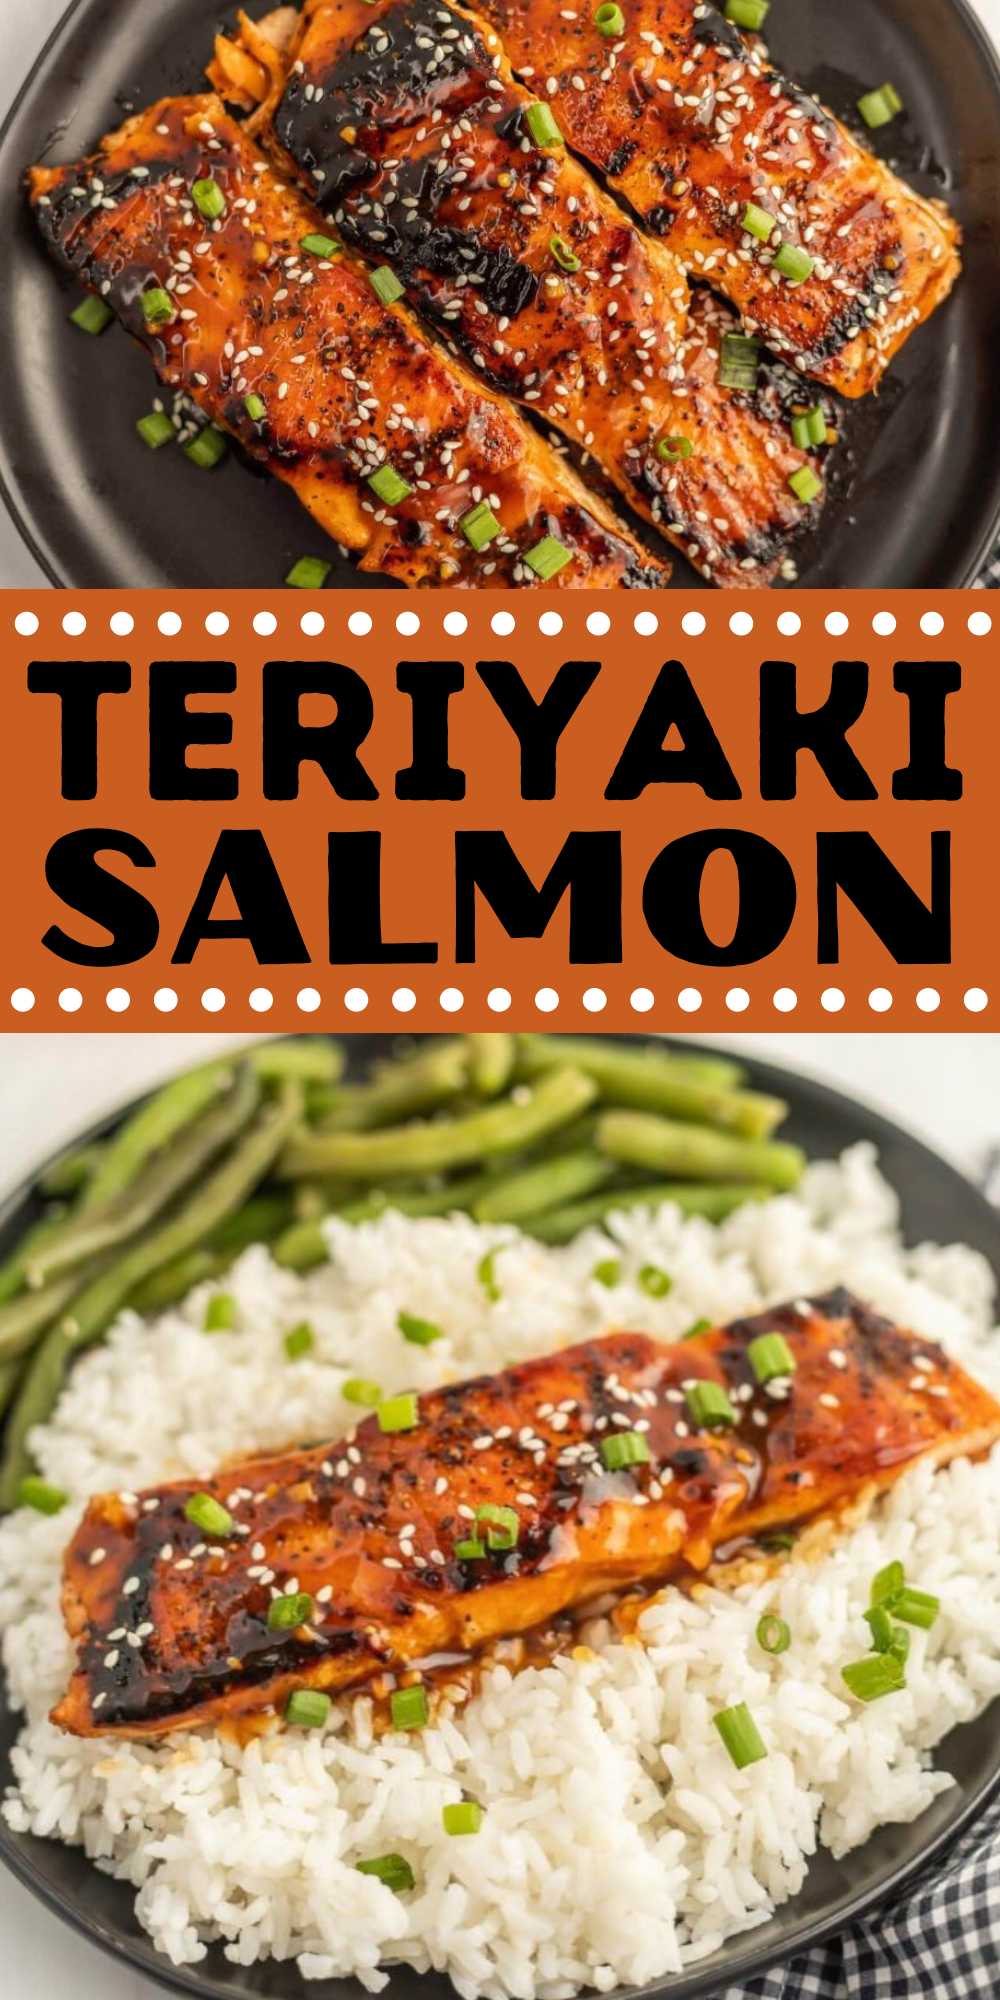 Teriyaki Salmon is cooked in a skillet and then topped with a Homemade Teriyaki Sauce. The salmon cooks flaky, juicy and delicious. Salmon is a healthy fish that we cook often. It doesn't take long to cook and the texture comes out perfectly with a flaky center. Add your favorite sides to complete this delicious meal idea. #eatingonadime #teriyakisalmon #salmonrecipe